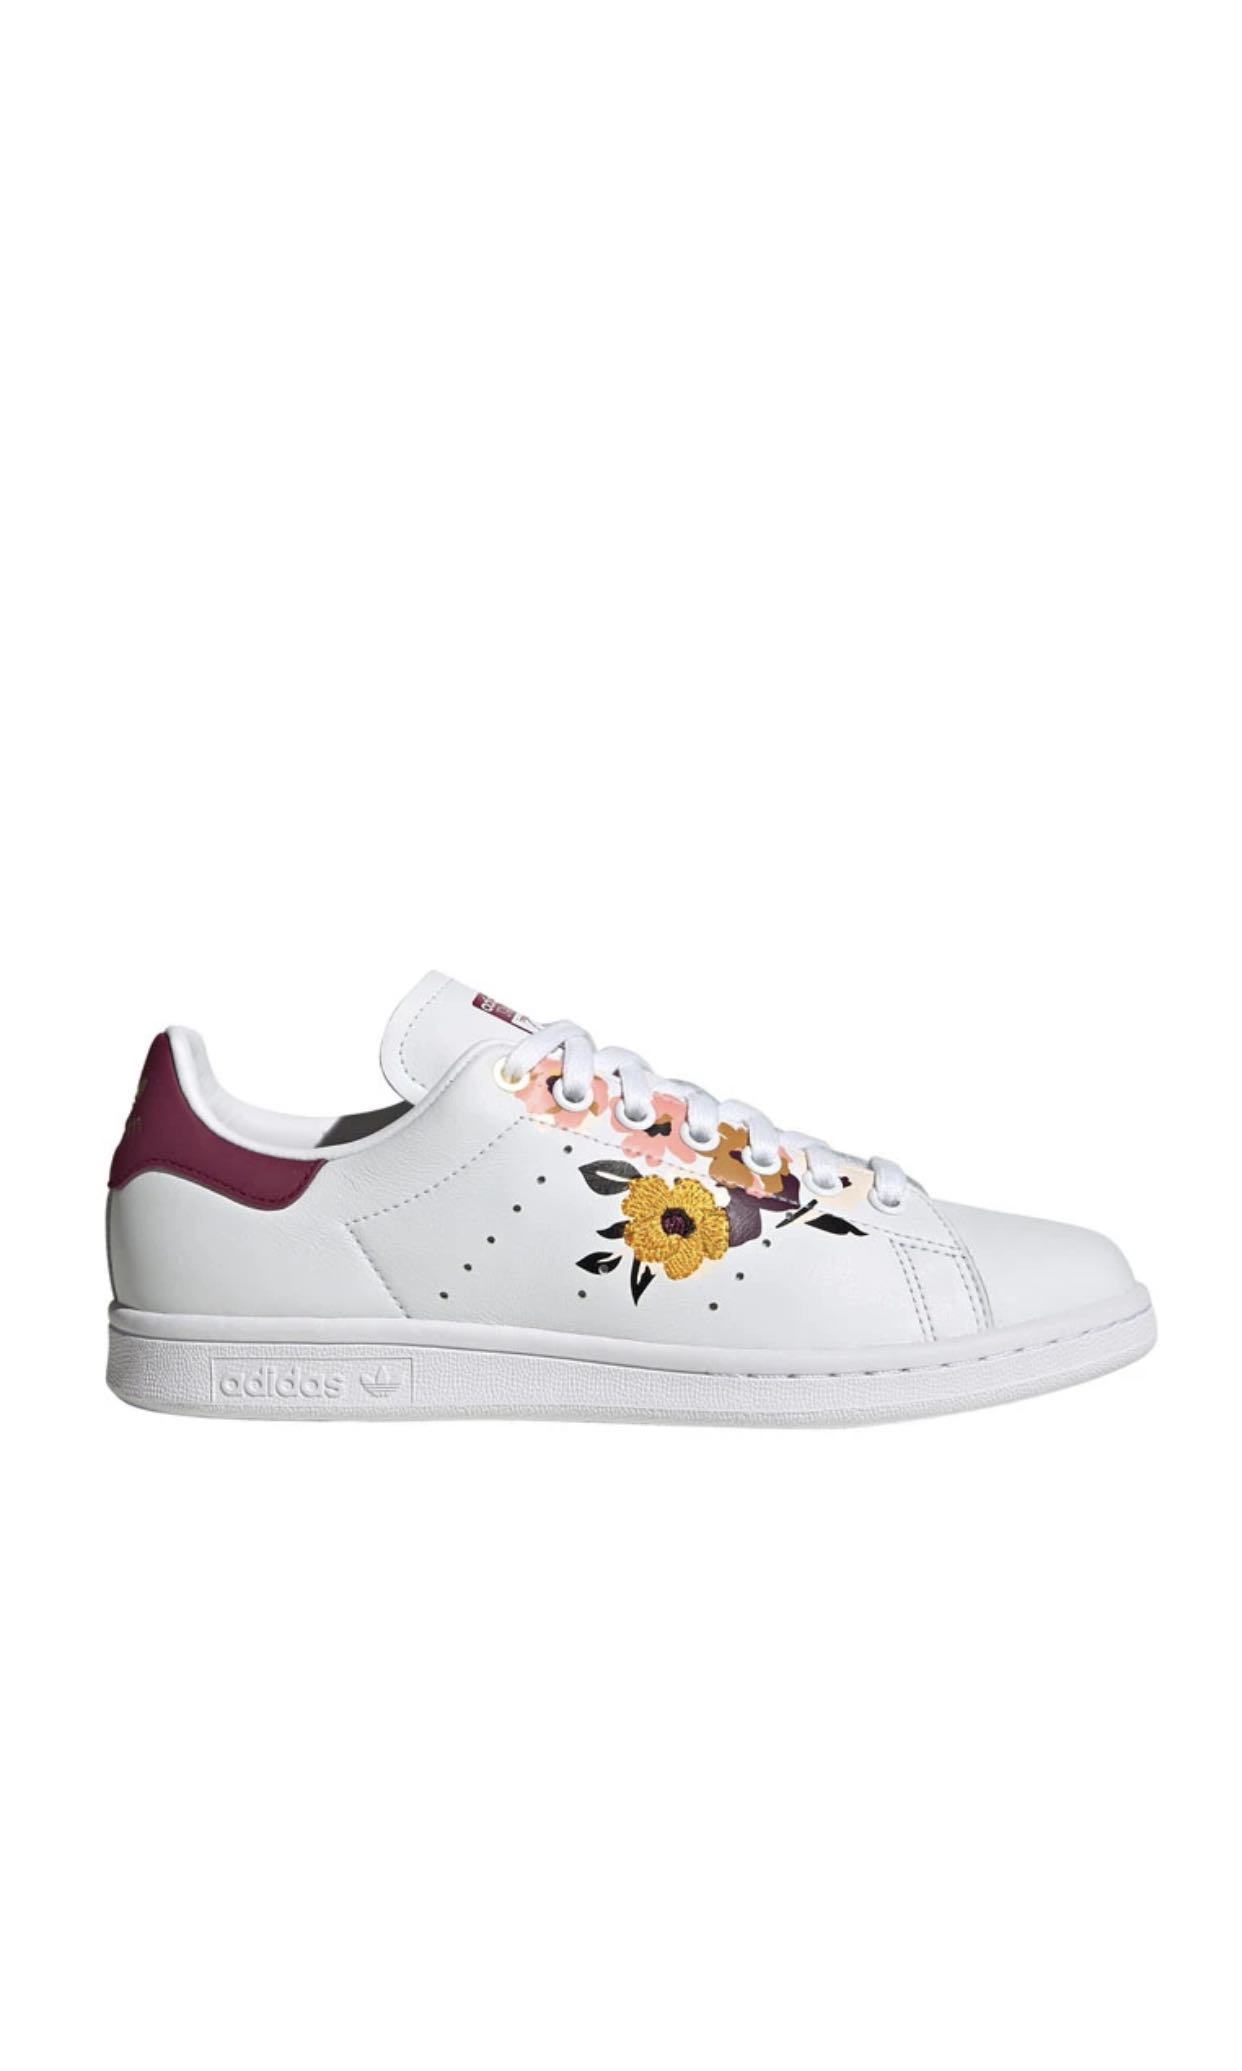 adidas stan smith limited edition 218